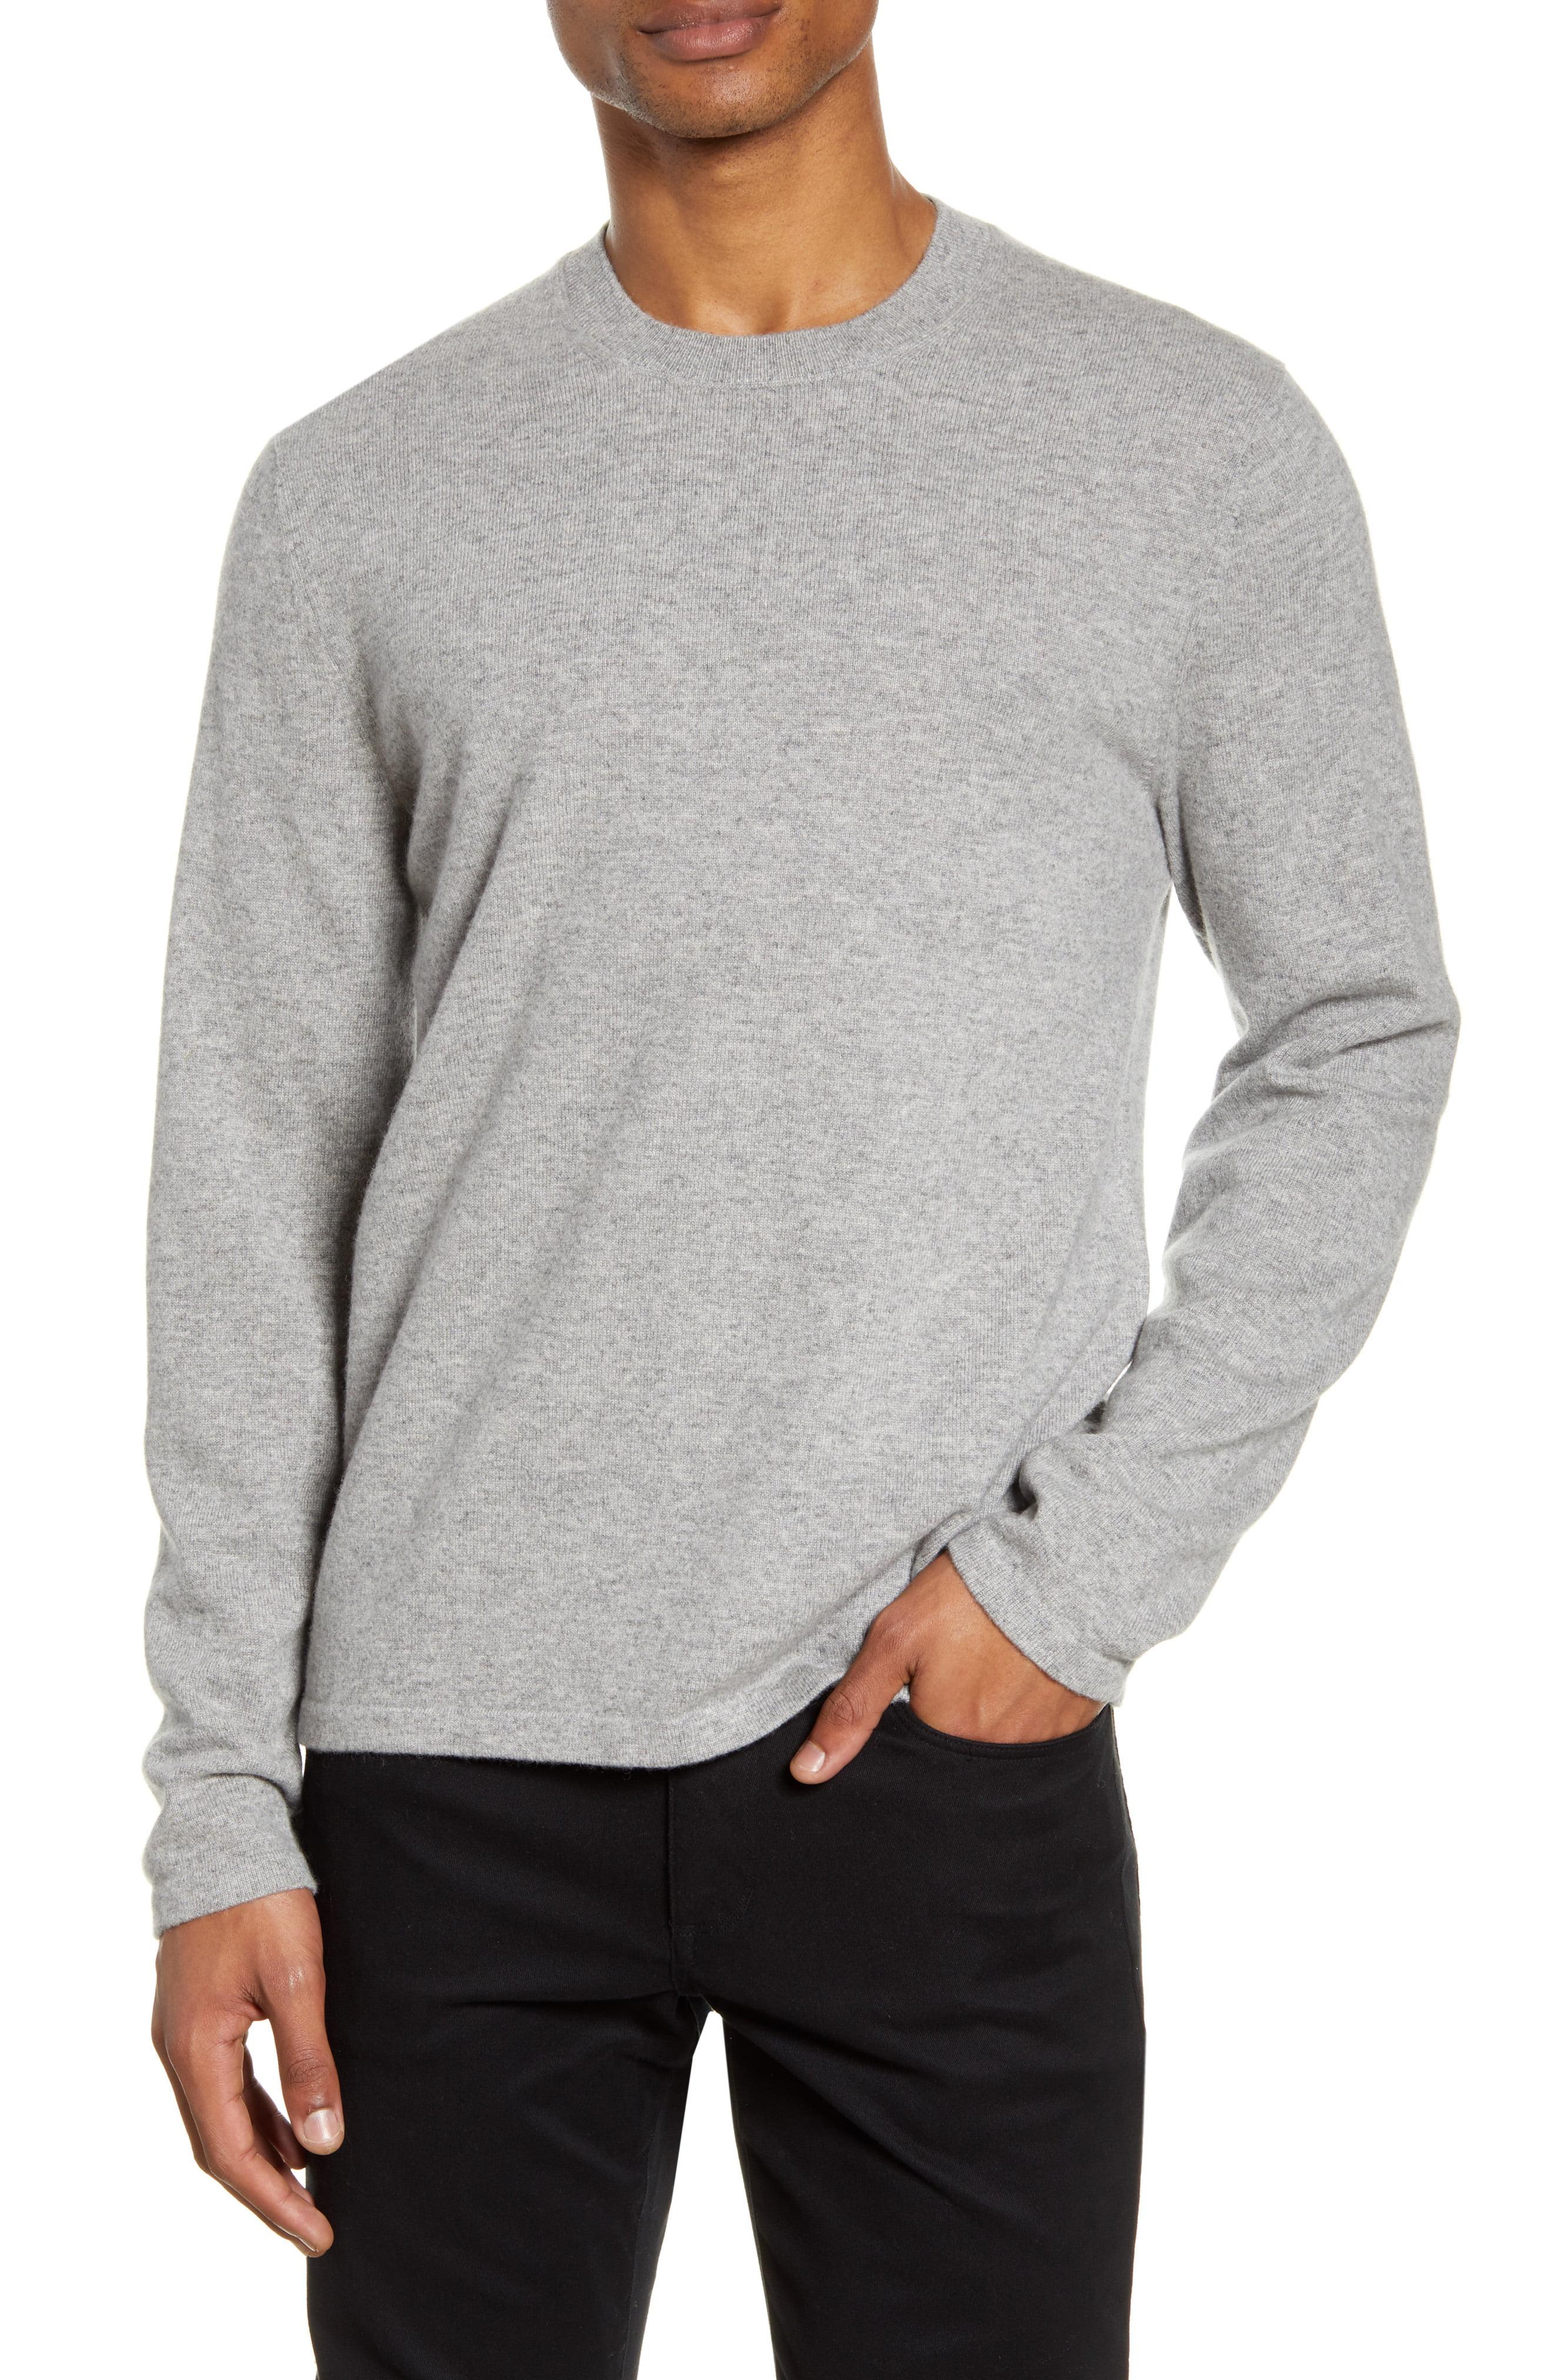 Vince Cashmere Crewneck Sweater in Heather Grey (Gray) for Men - Lyst